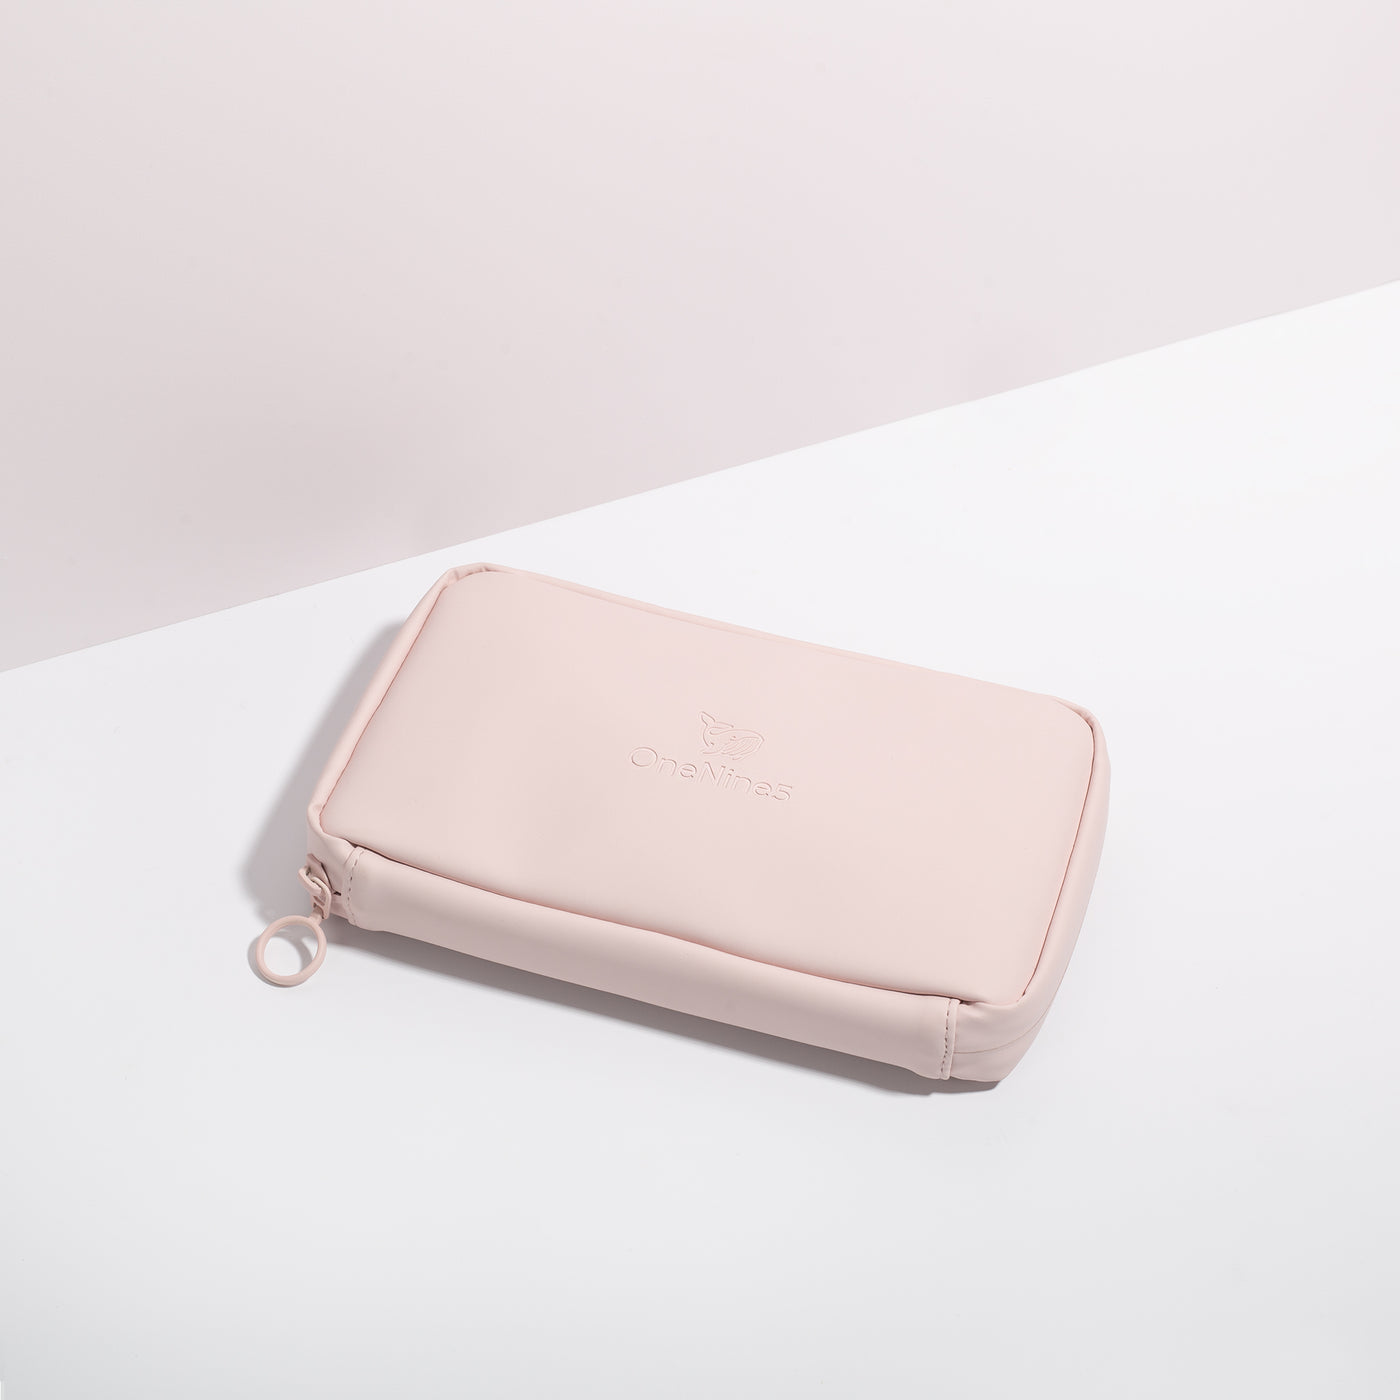 Komodo Pink Eco Essentials Pouch zipped closed and laid flat on a white surface, with a pink background behind. The angle of the image show’s the underside of the pouch. In the foreground, the metal O-ring zipper puller is visible on the left corner of the pouch.